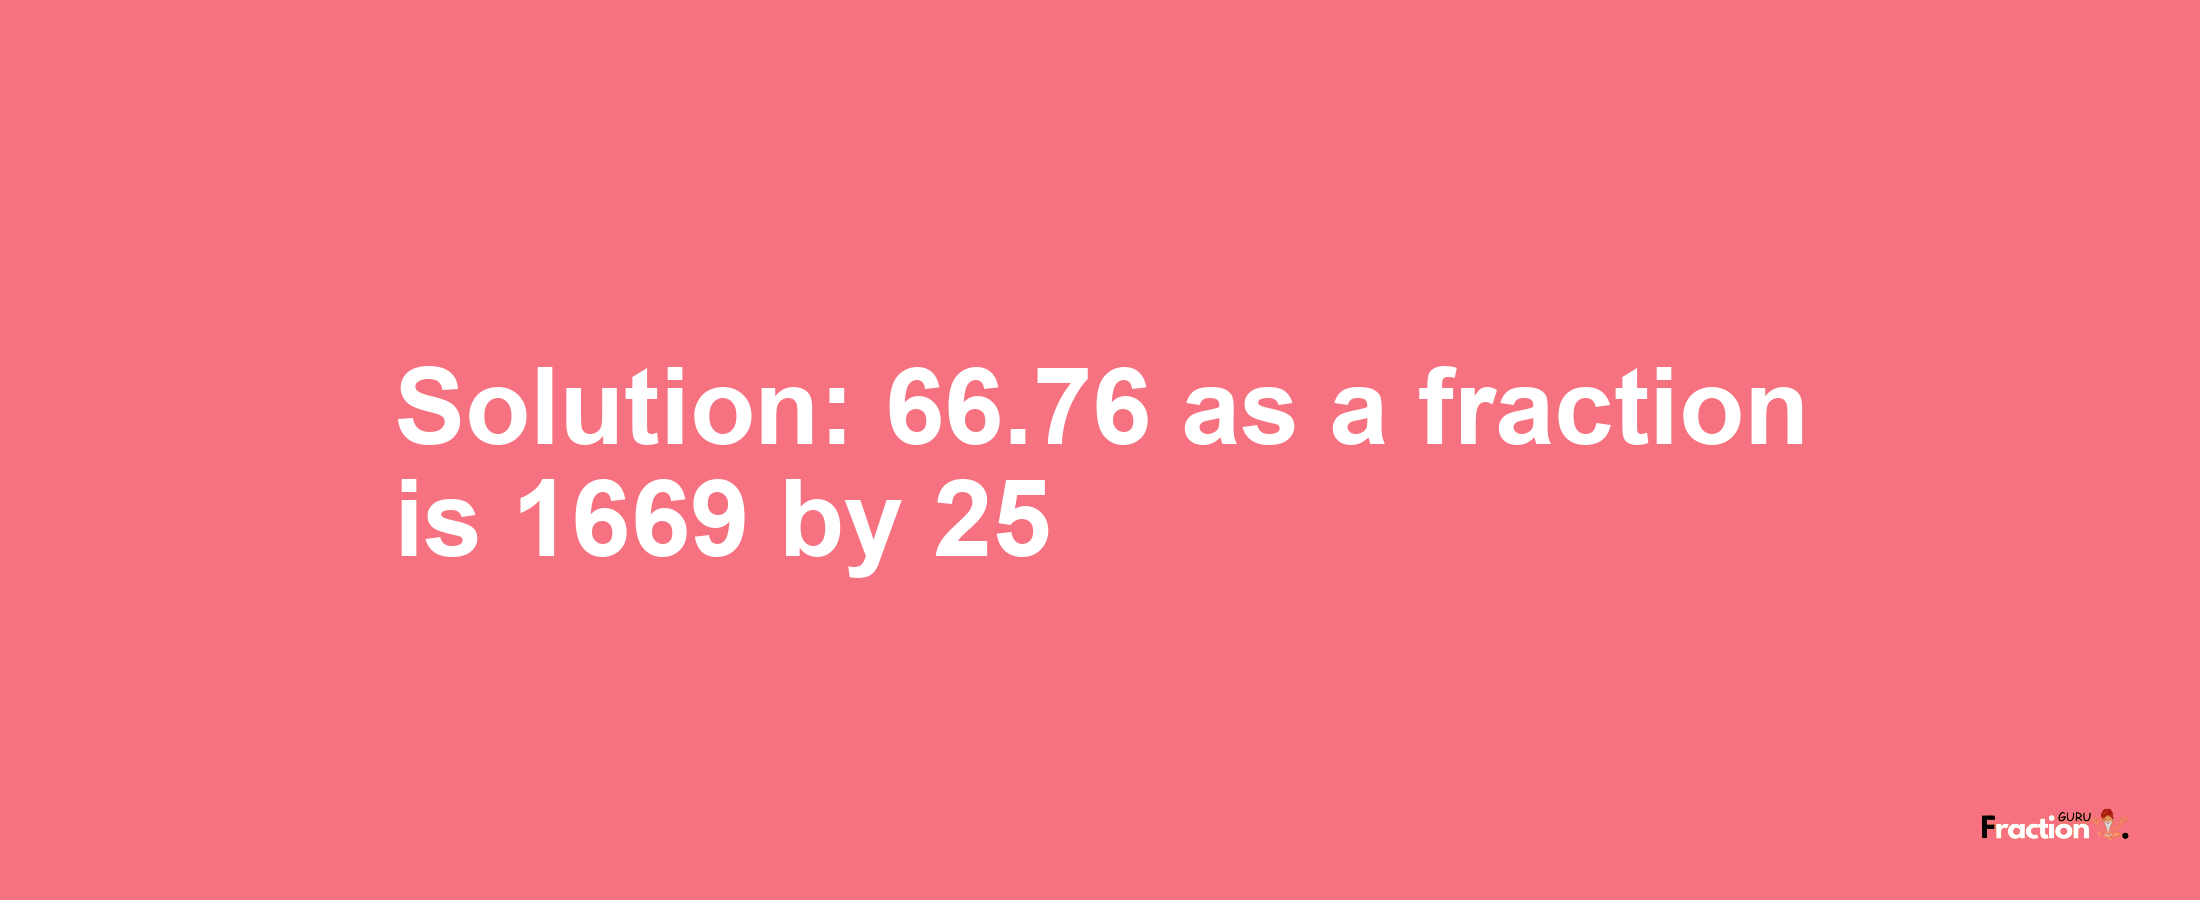 Solution:66.76 as a fraction is 1669/25